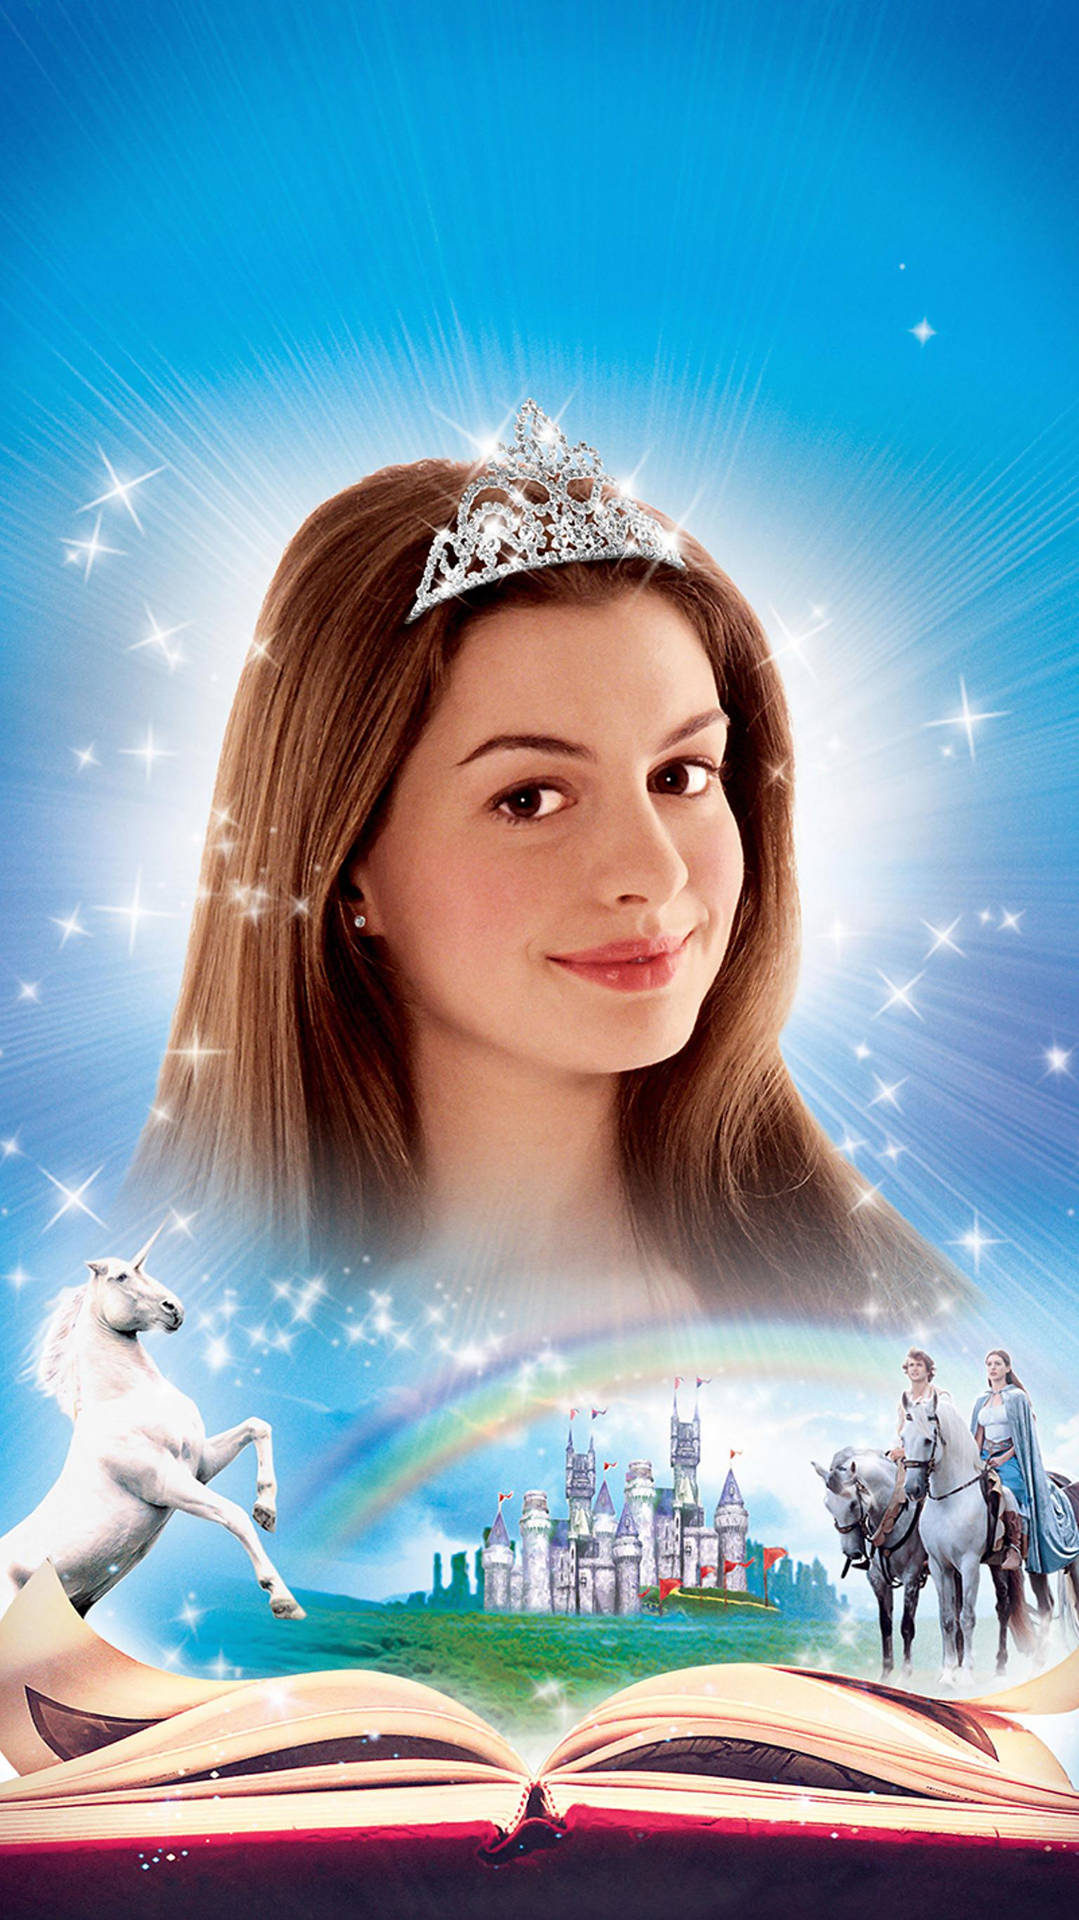 Awesome Ella Enchanted Movie Poster Wallpaper